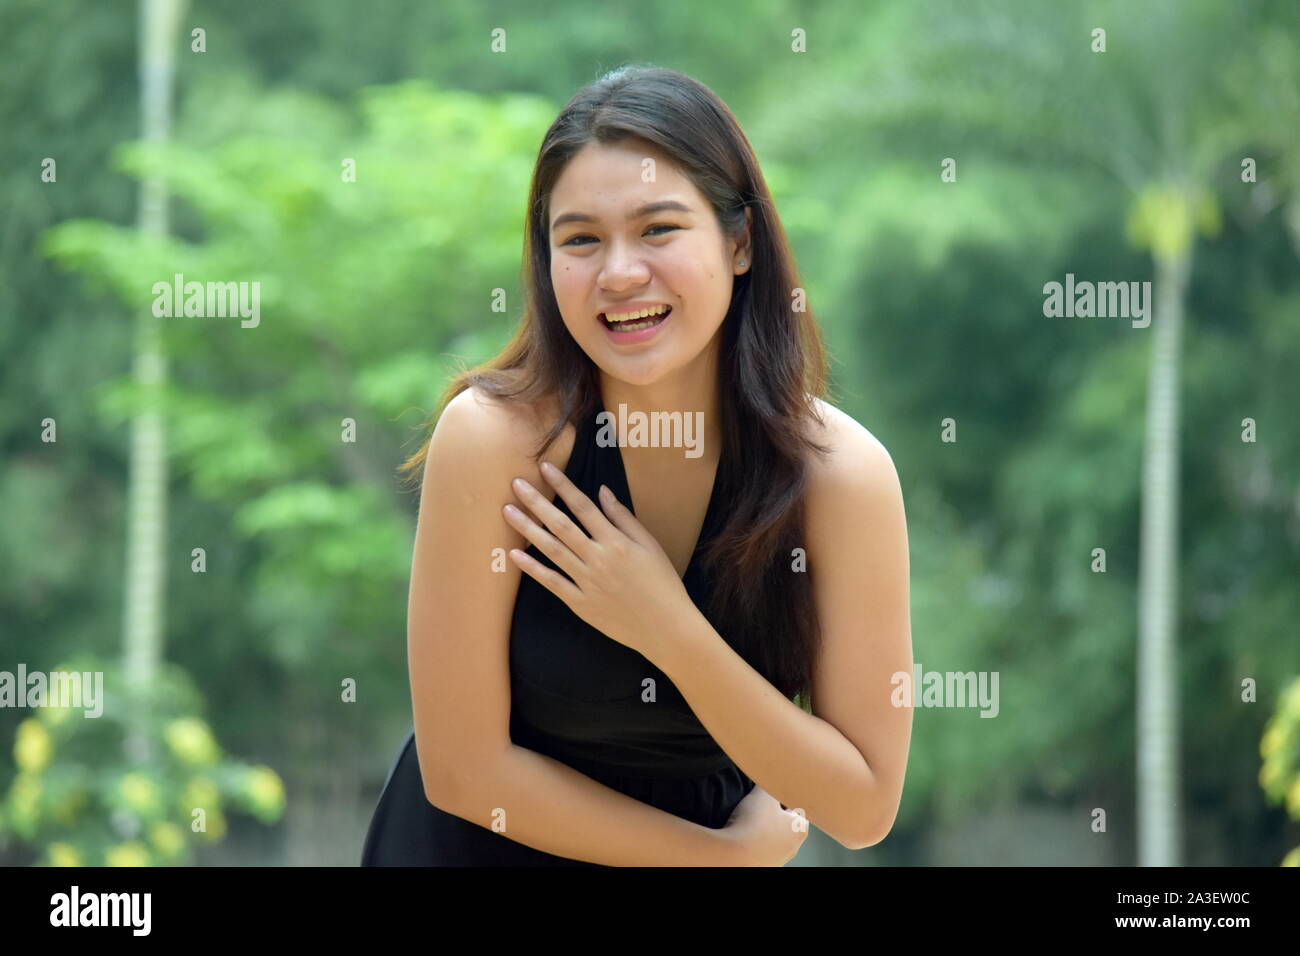 A Young Adult Female Laughing Stock Photo